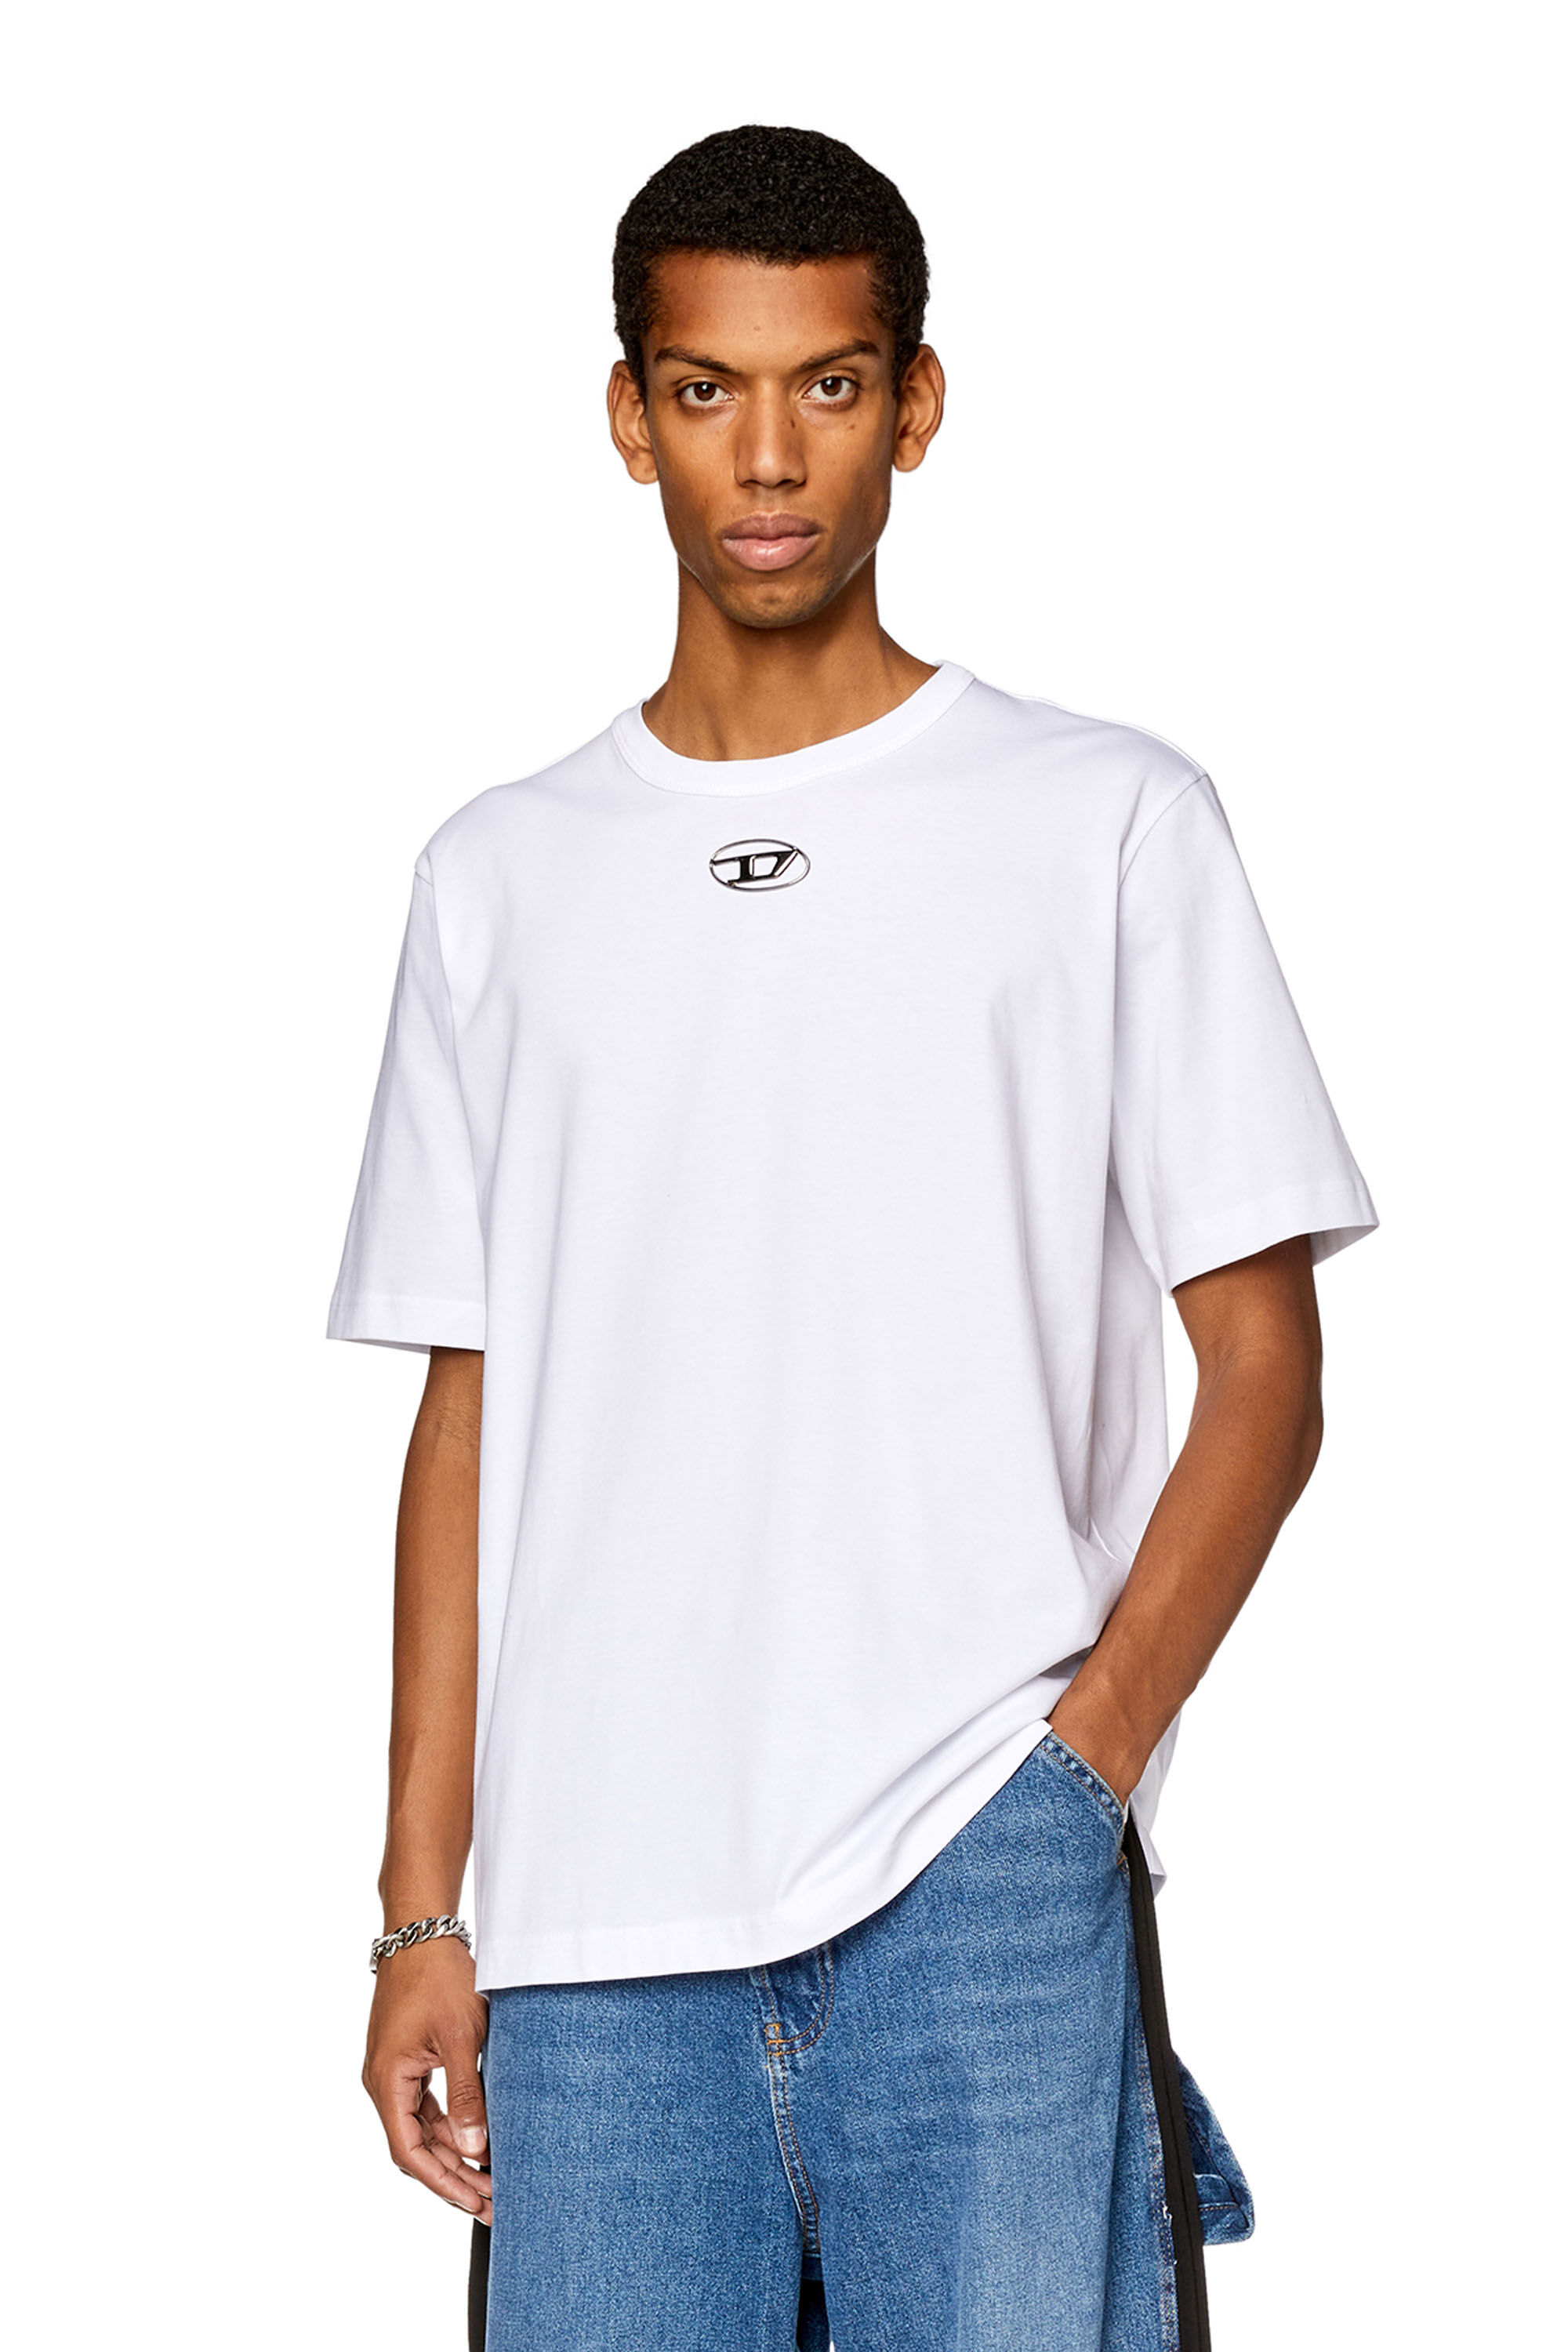 Men's T-shirt with injection moulded logo | White | Diesel